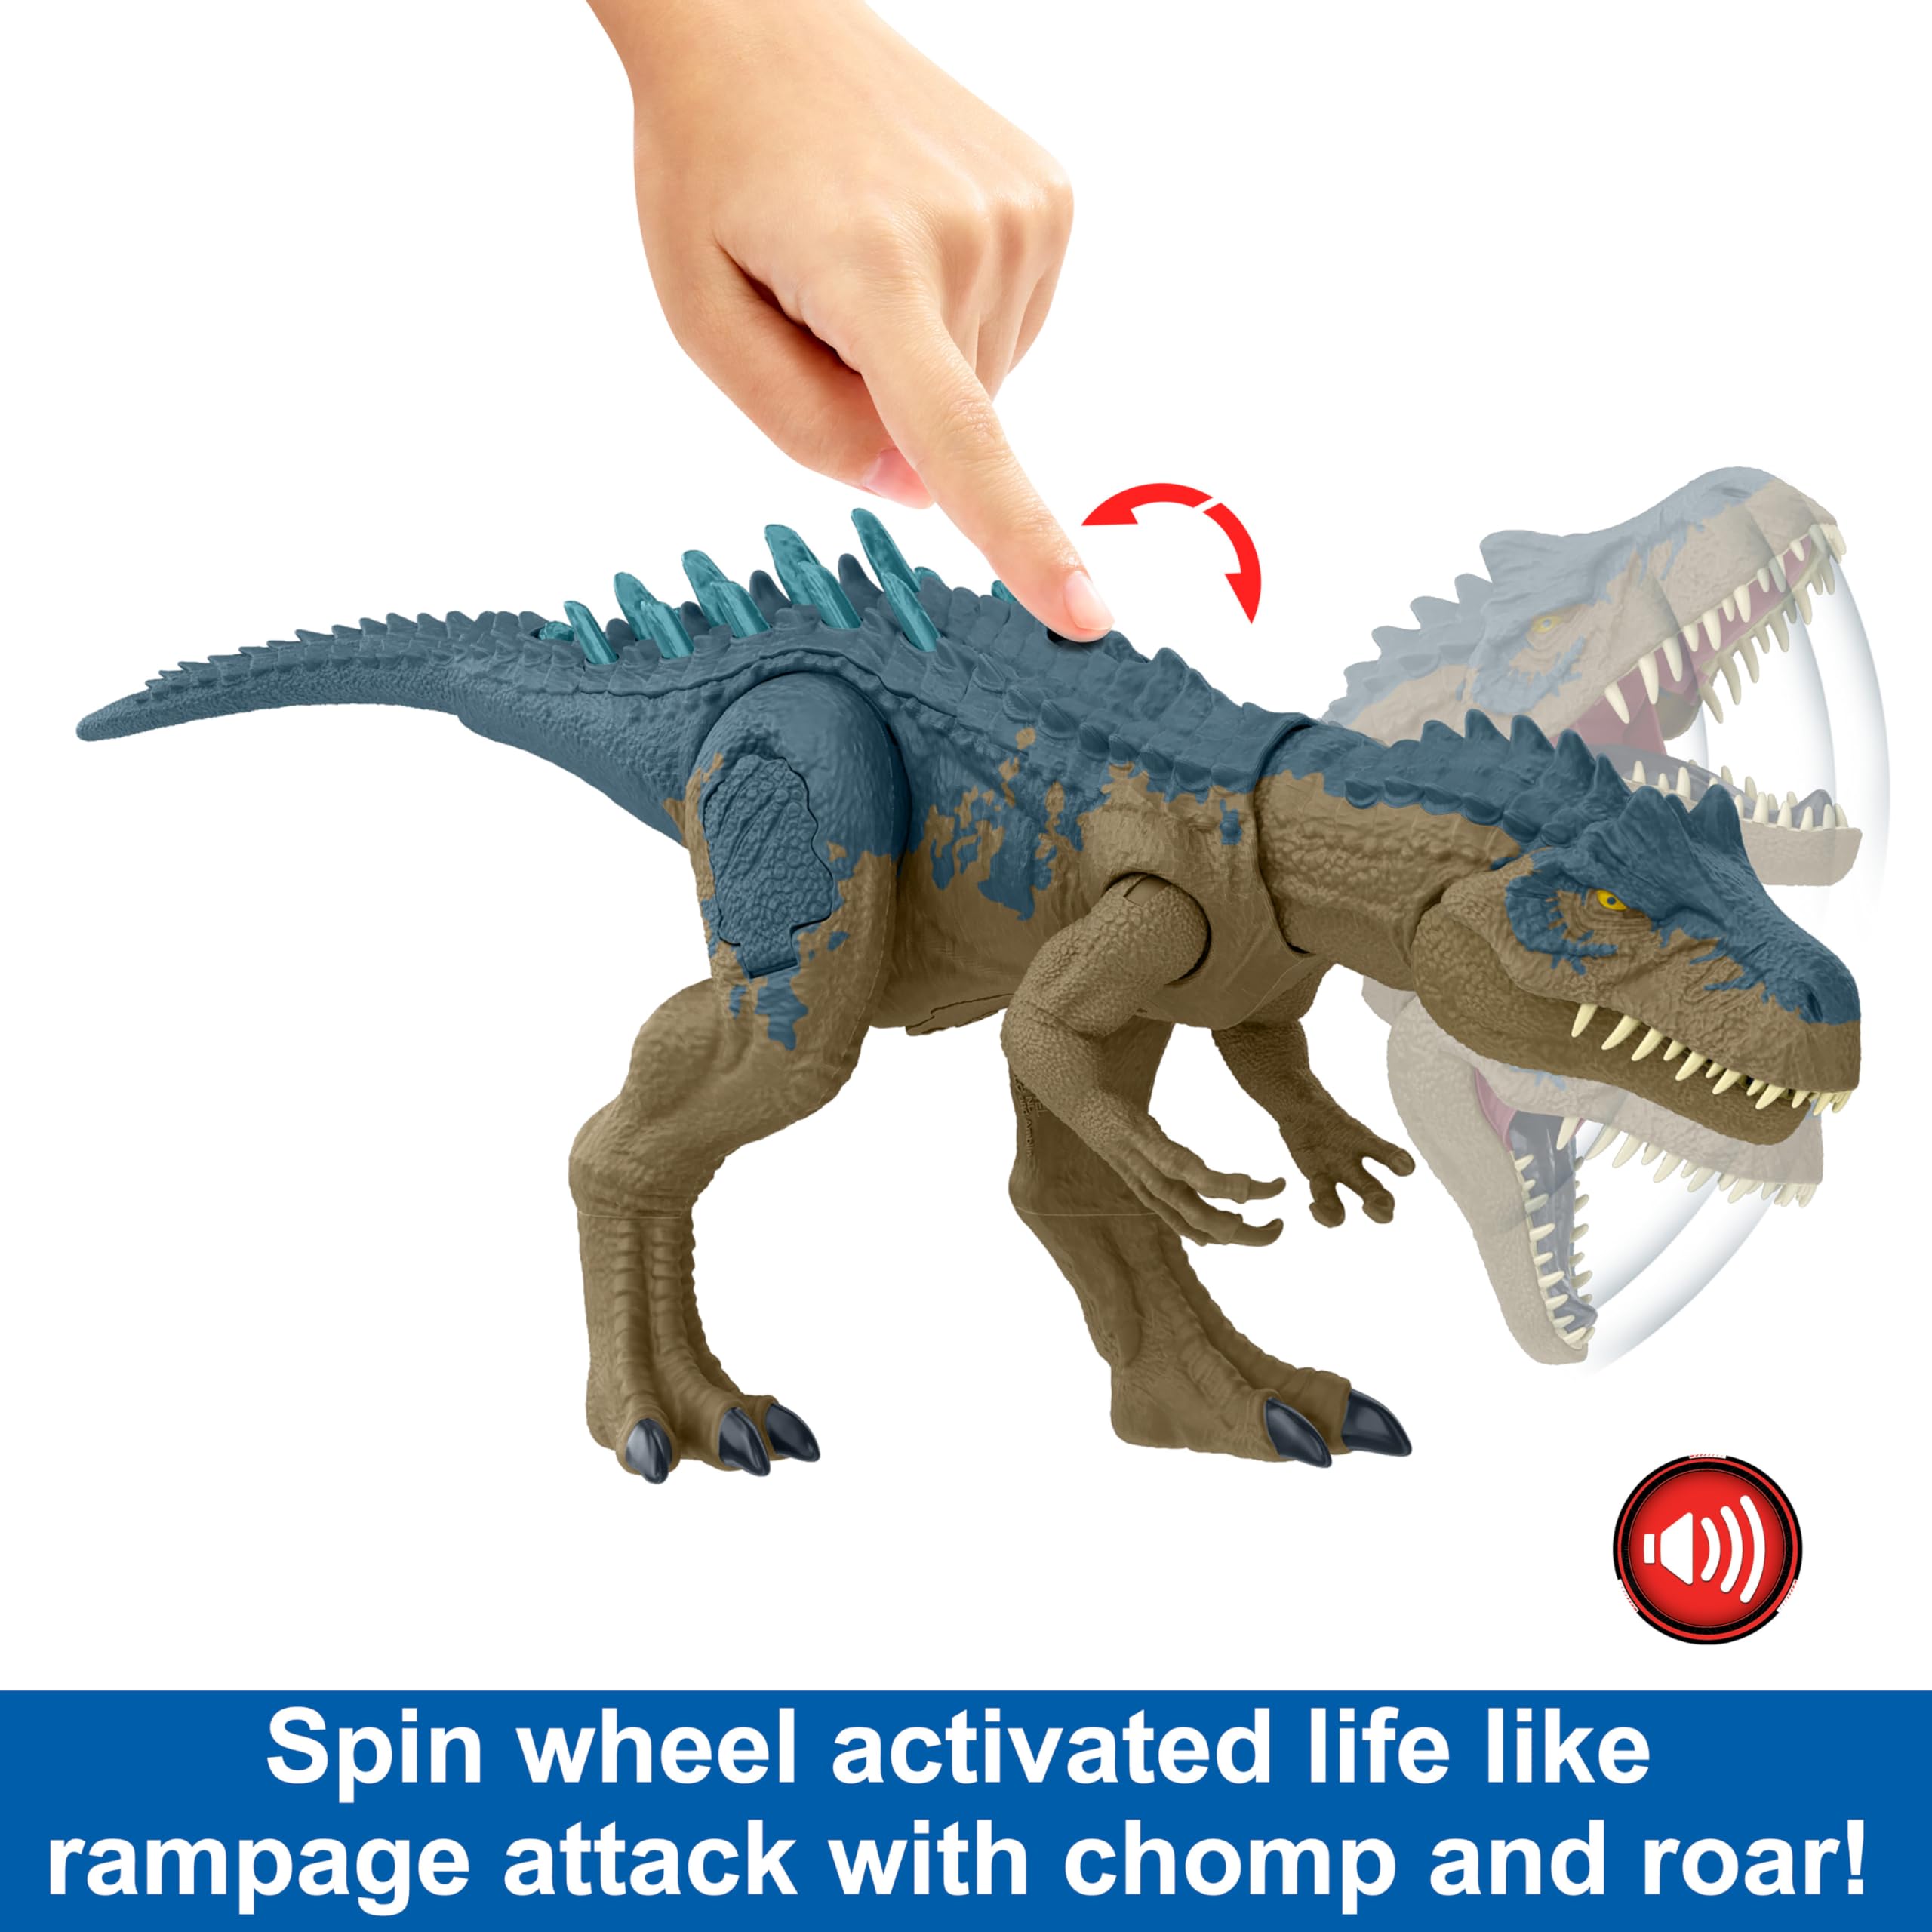 Mattel Jurassic World Ruthless Rampagin Allosaurus Dinosaur Toy, Action Figure with Continuous Chomp Attack & Roar Sounds, Button Activated Evolved Battle Spikes